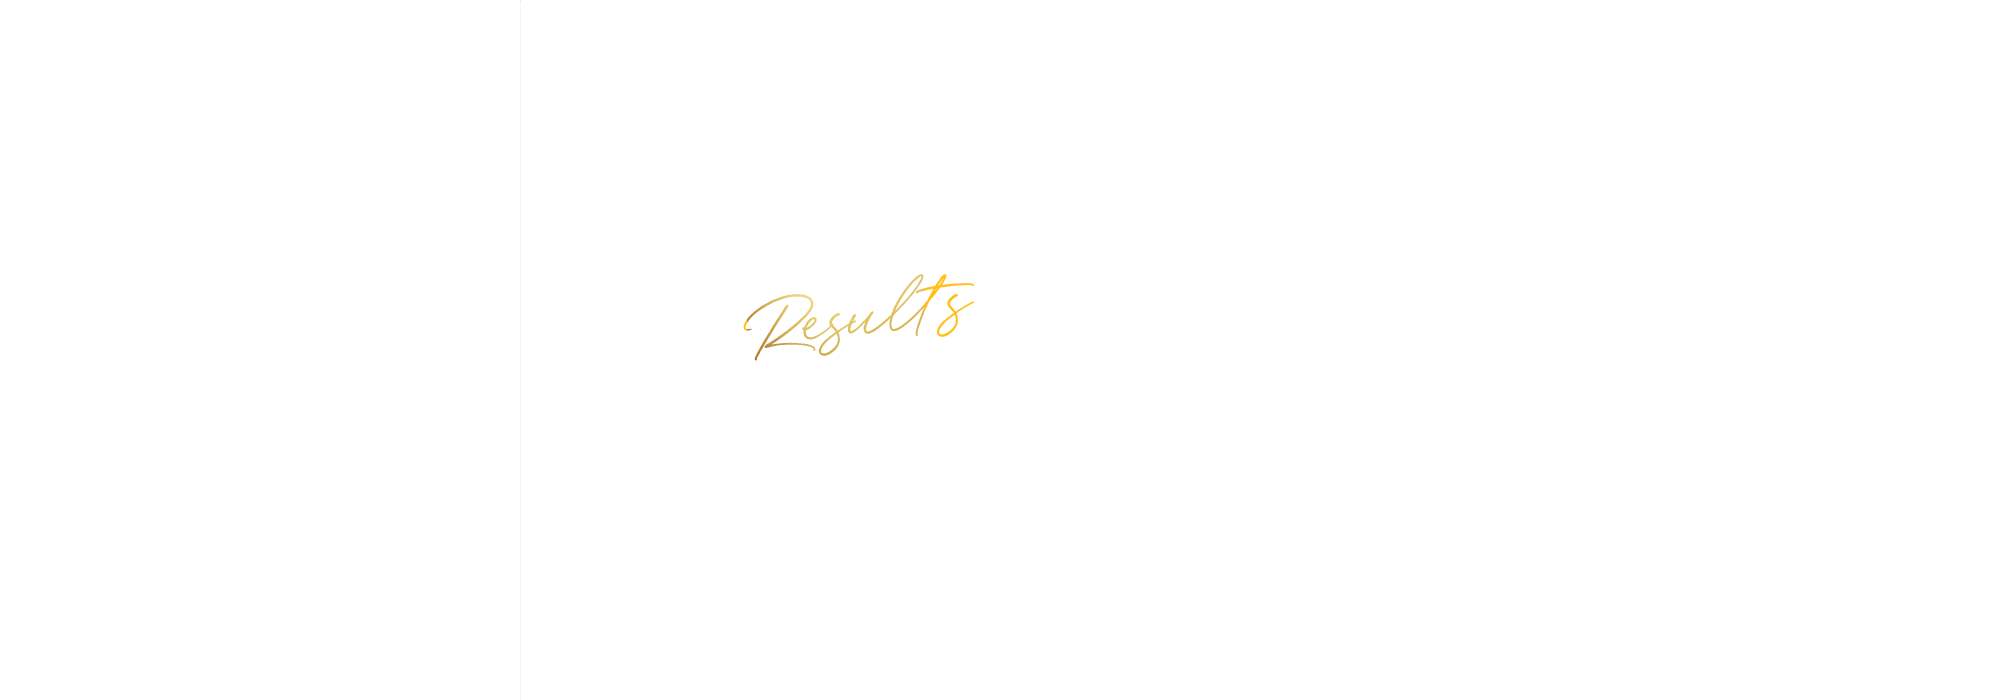 banner_works_text2